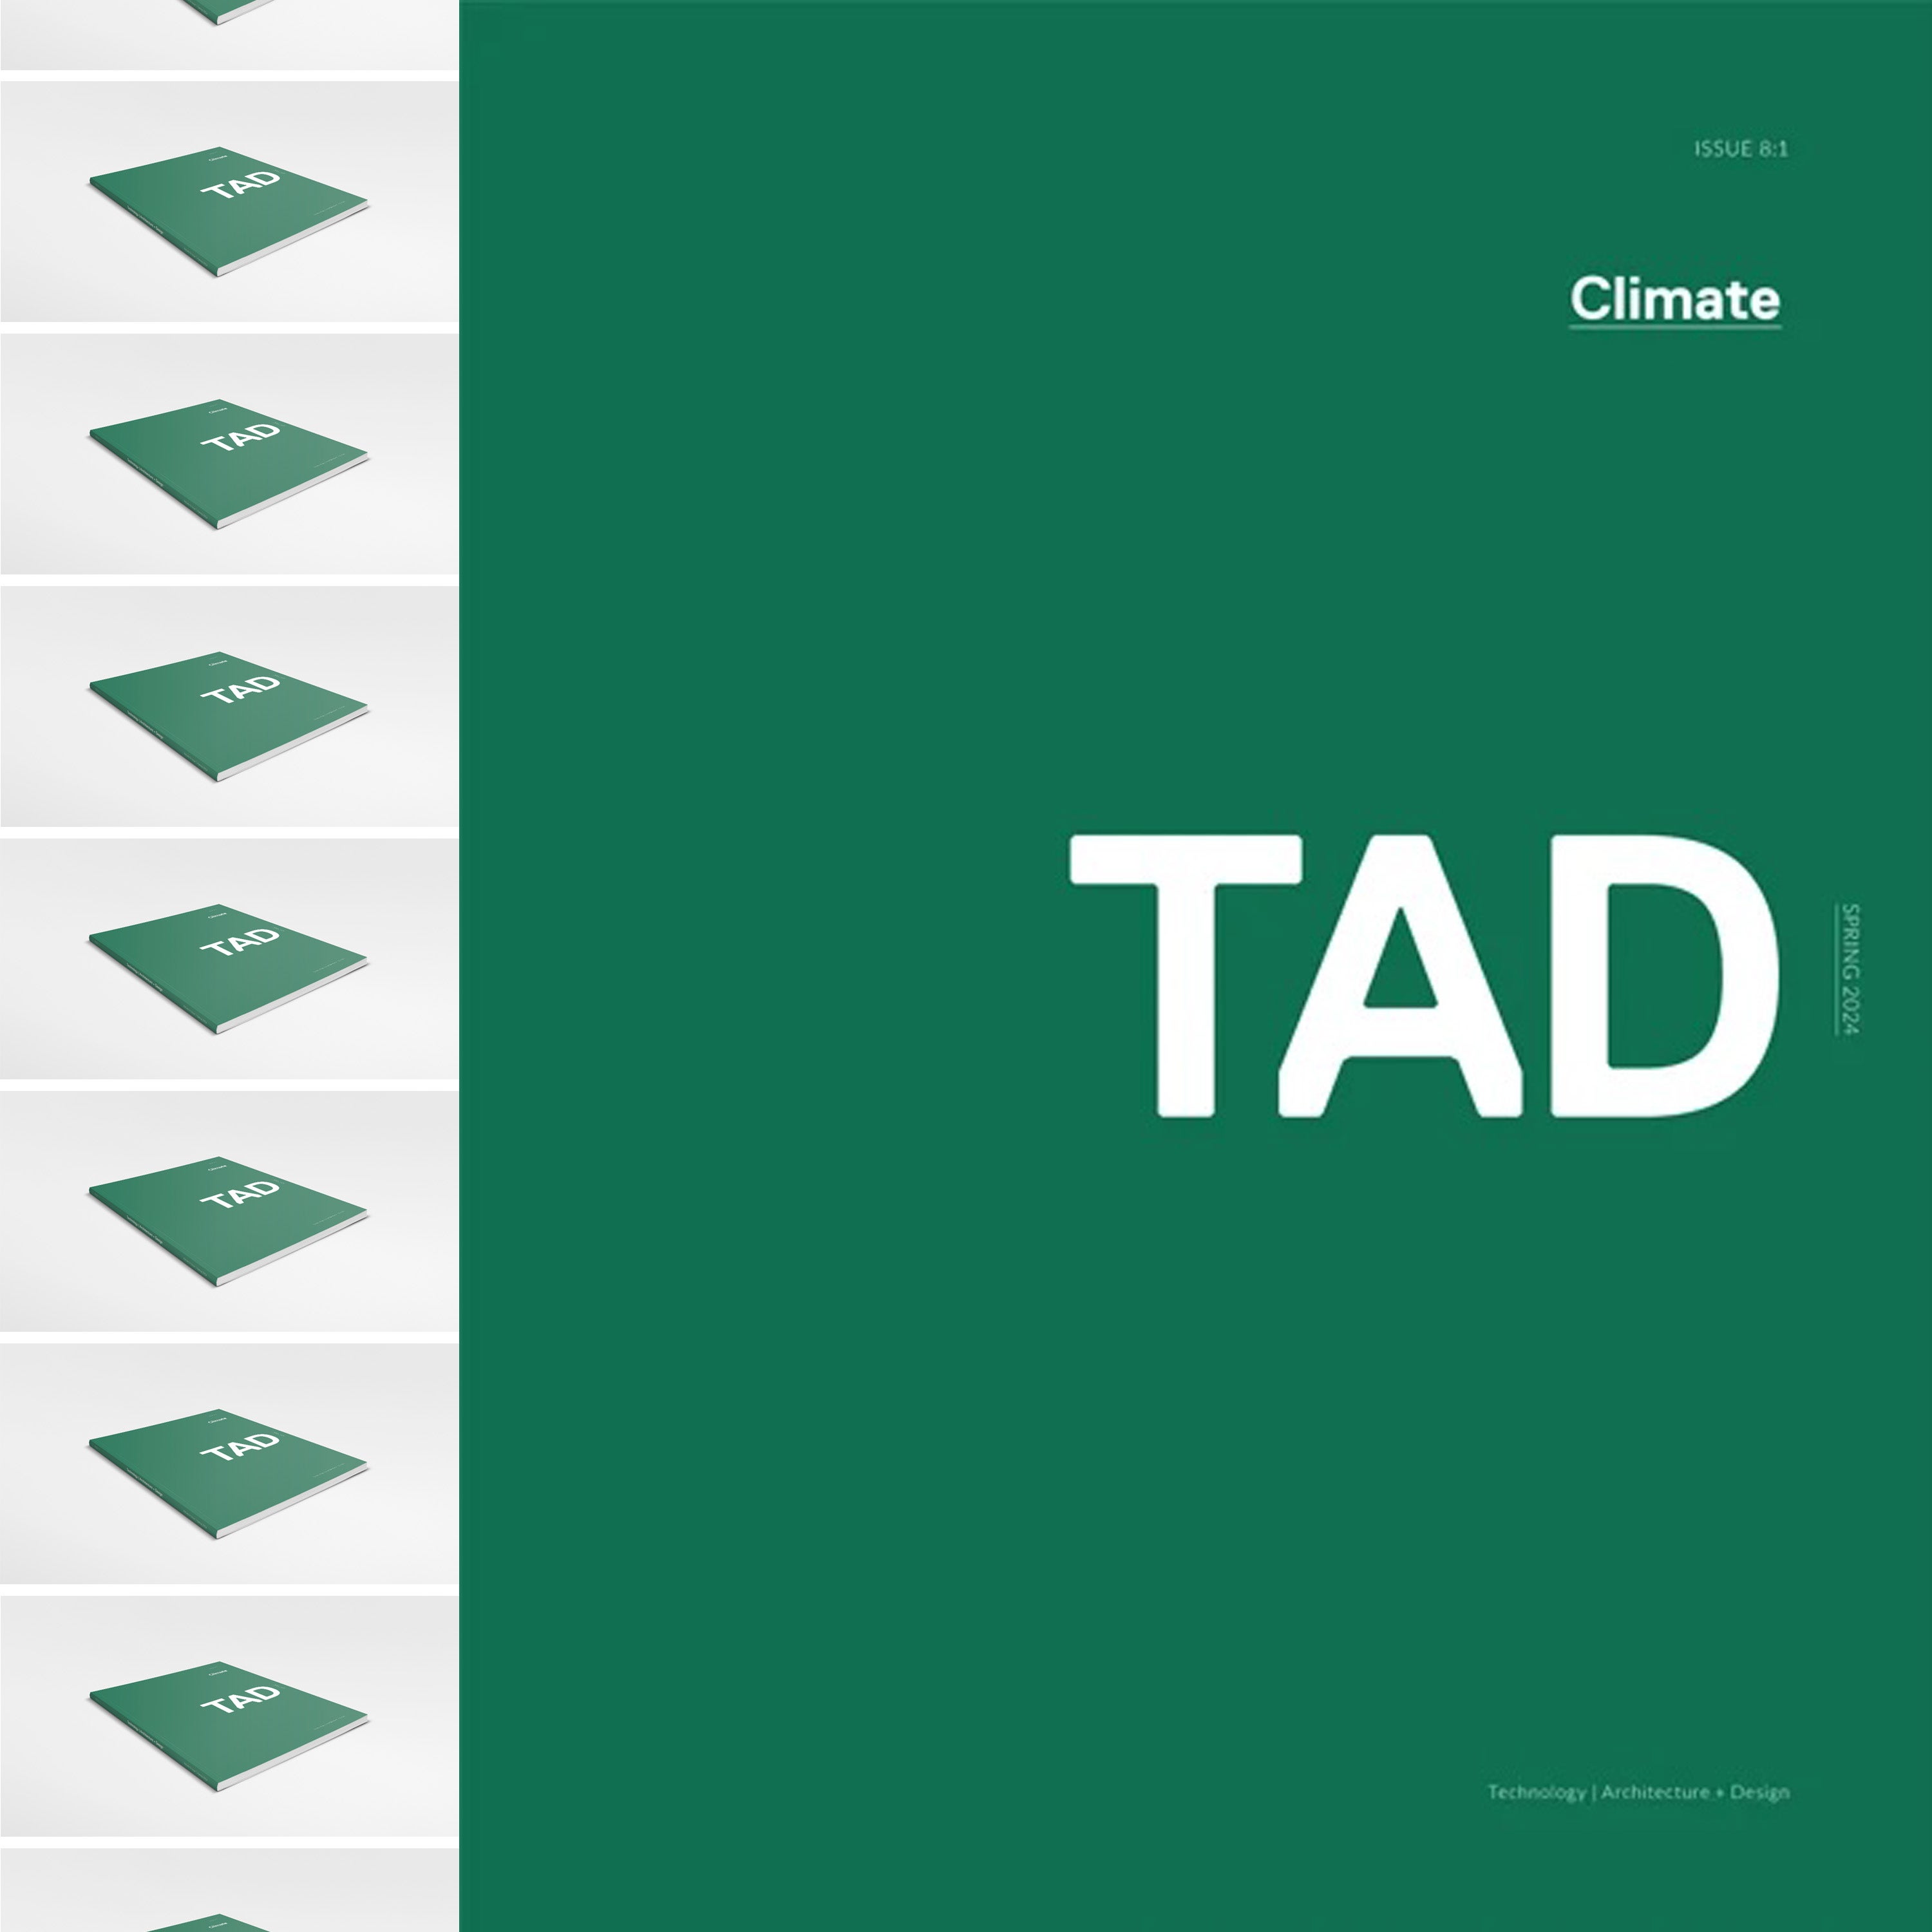 TAD Journal Cover Climate Issue 8:1